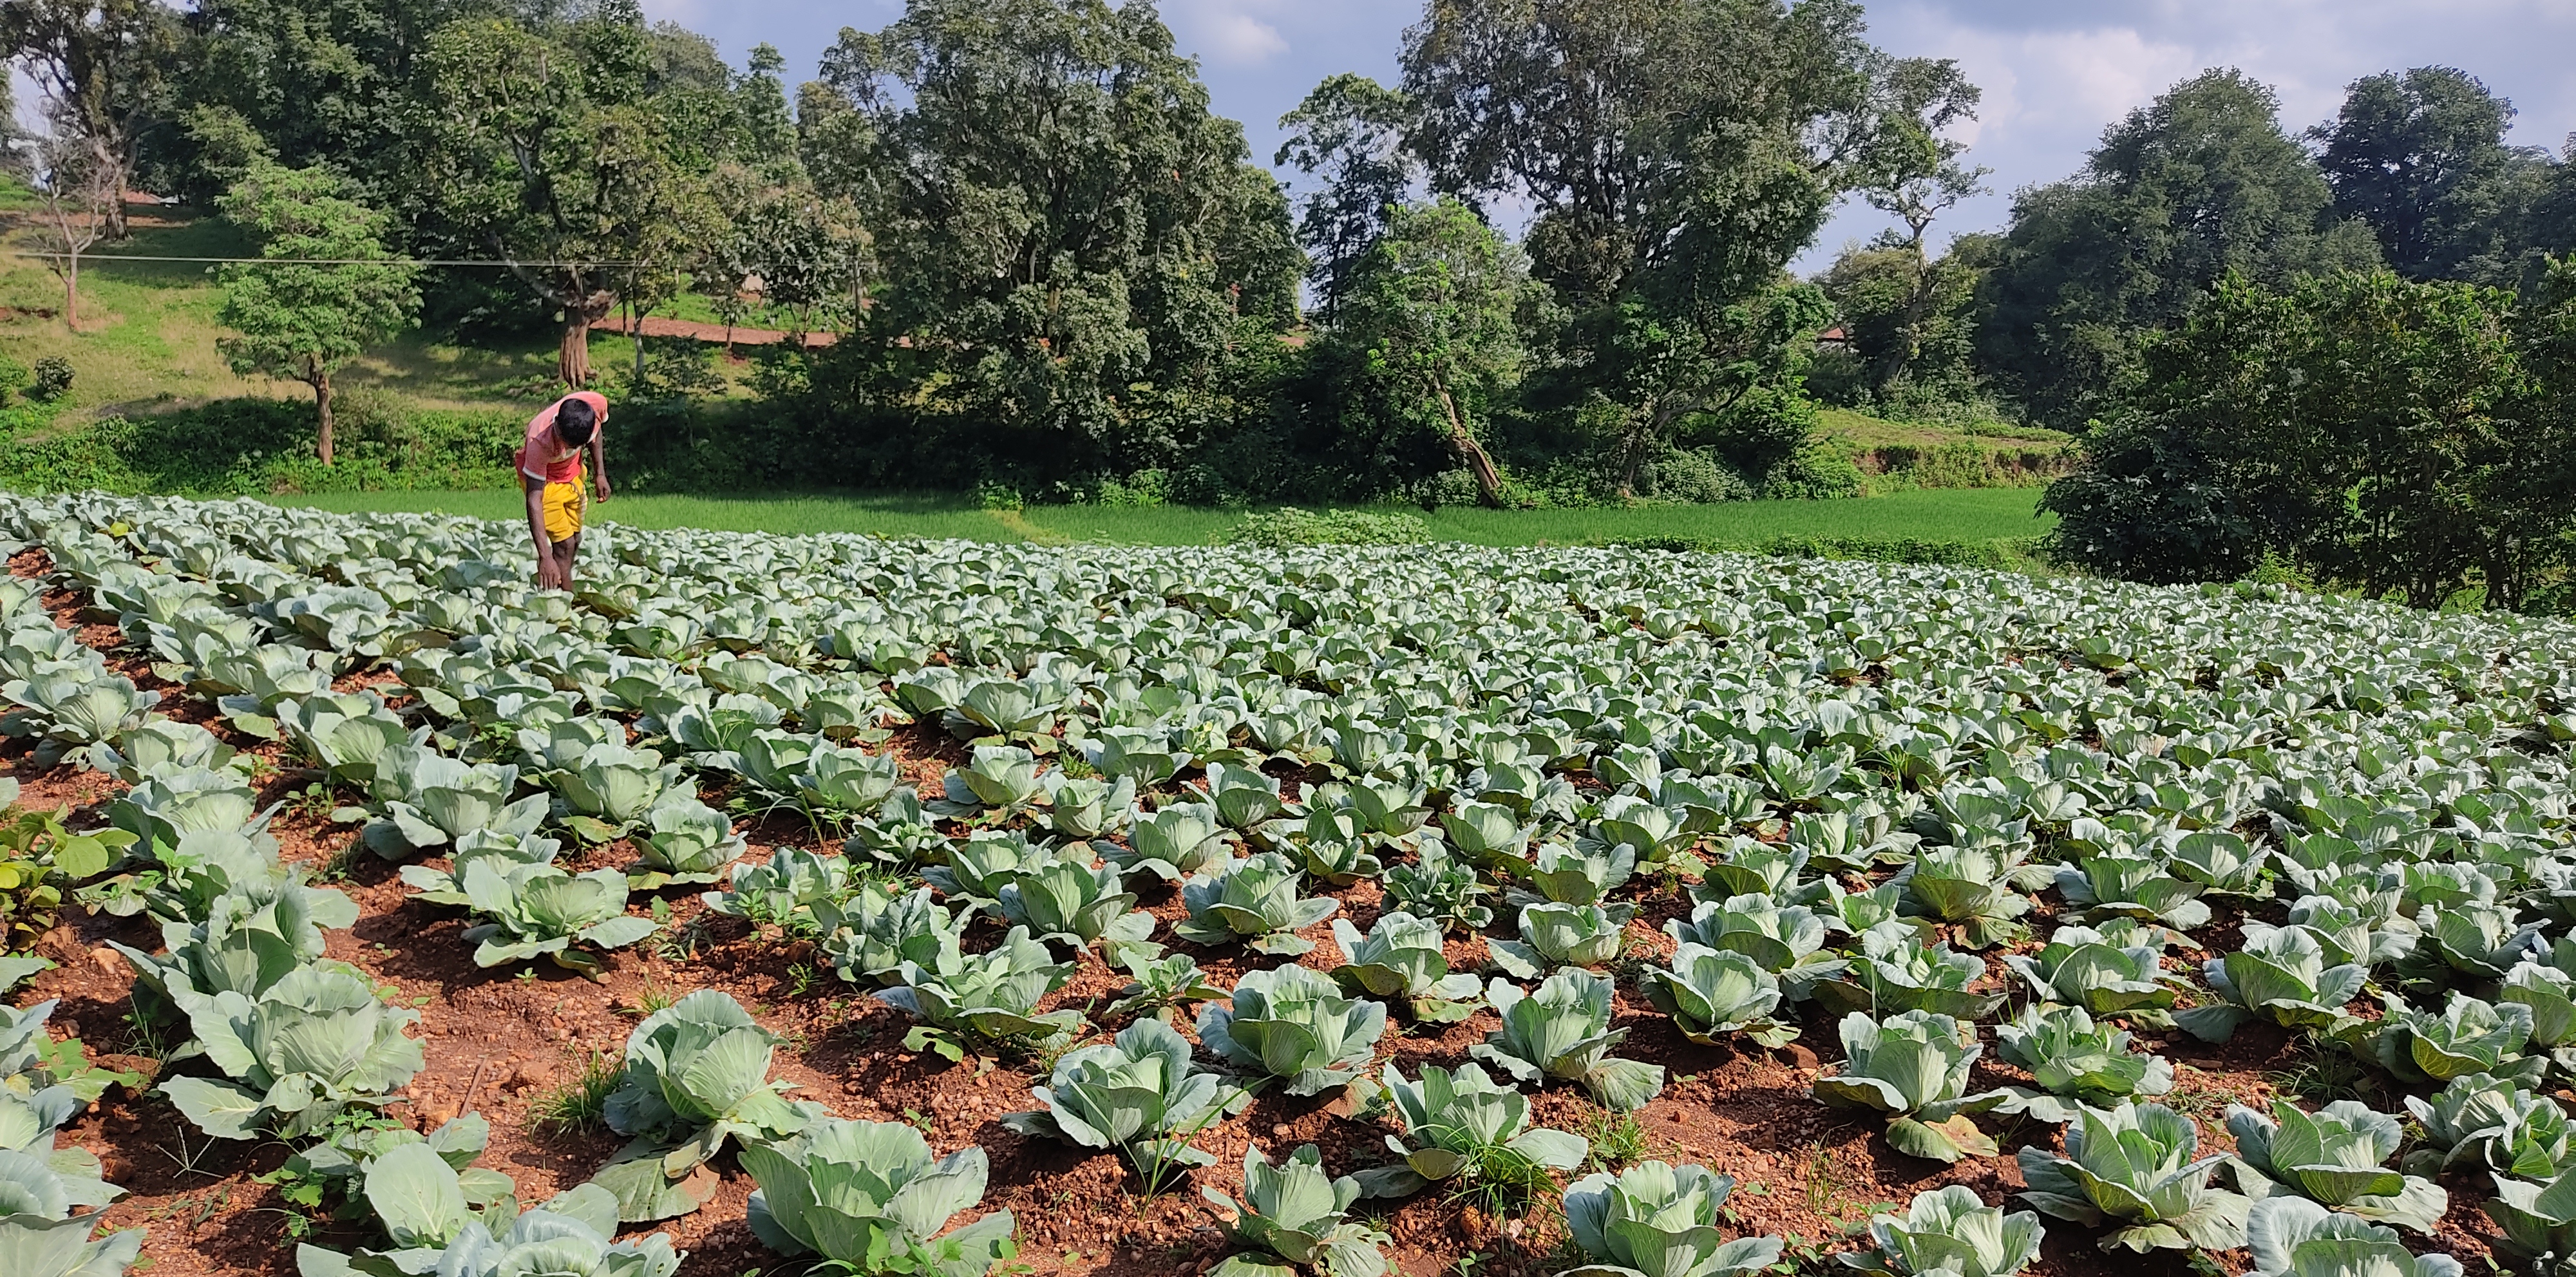 Growing cabbages for higher nutrition and income -  Hatinada village, West Bengal